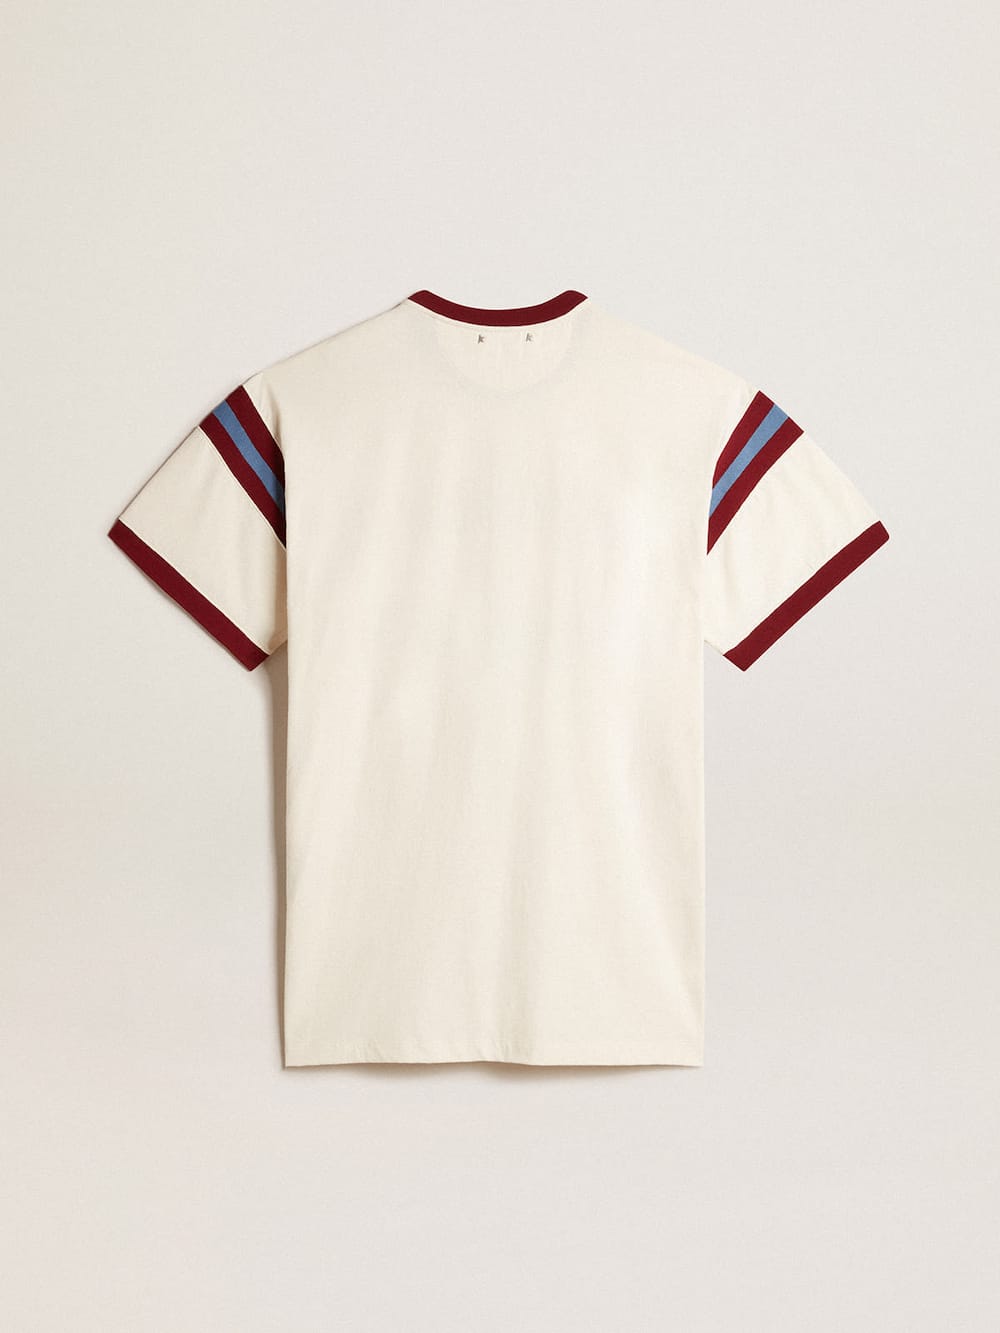 Golden Goose - Women’s white dress with burgundy lettering on the front in 